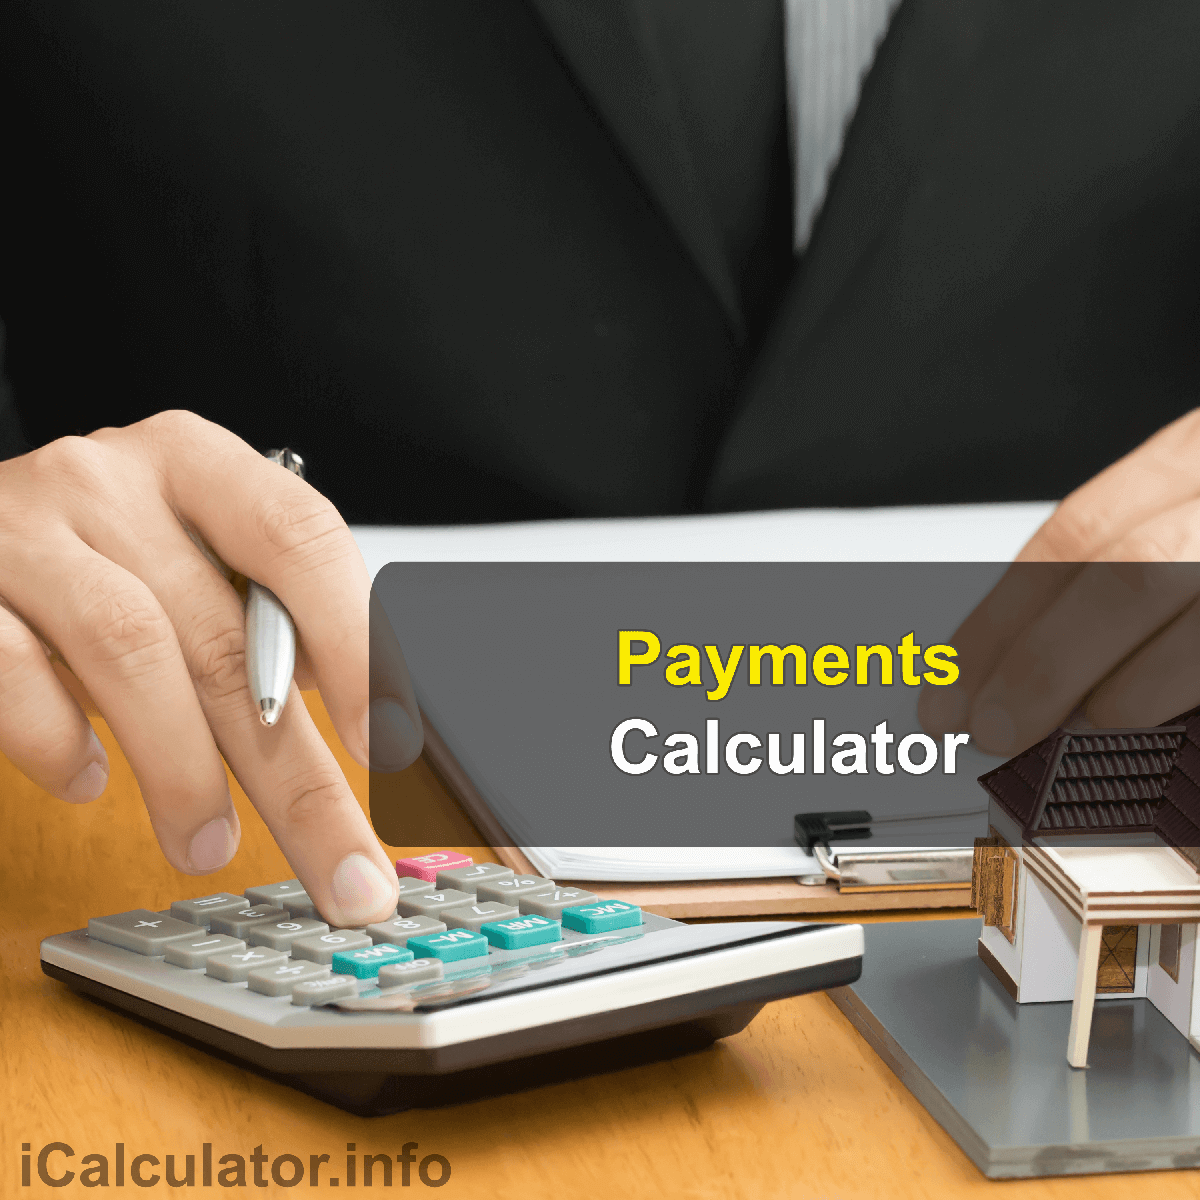 Payments Calculator. This image provides details of how to calculate payments on a loan por mortgage using a good calculator, a pencil and paper. By using the repayments formula, the Payments Calculator provides a comparison calculation of how many payments are required to repay a fixed amount of money, a mortgage for example